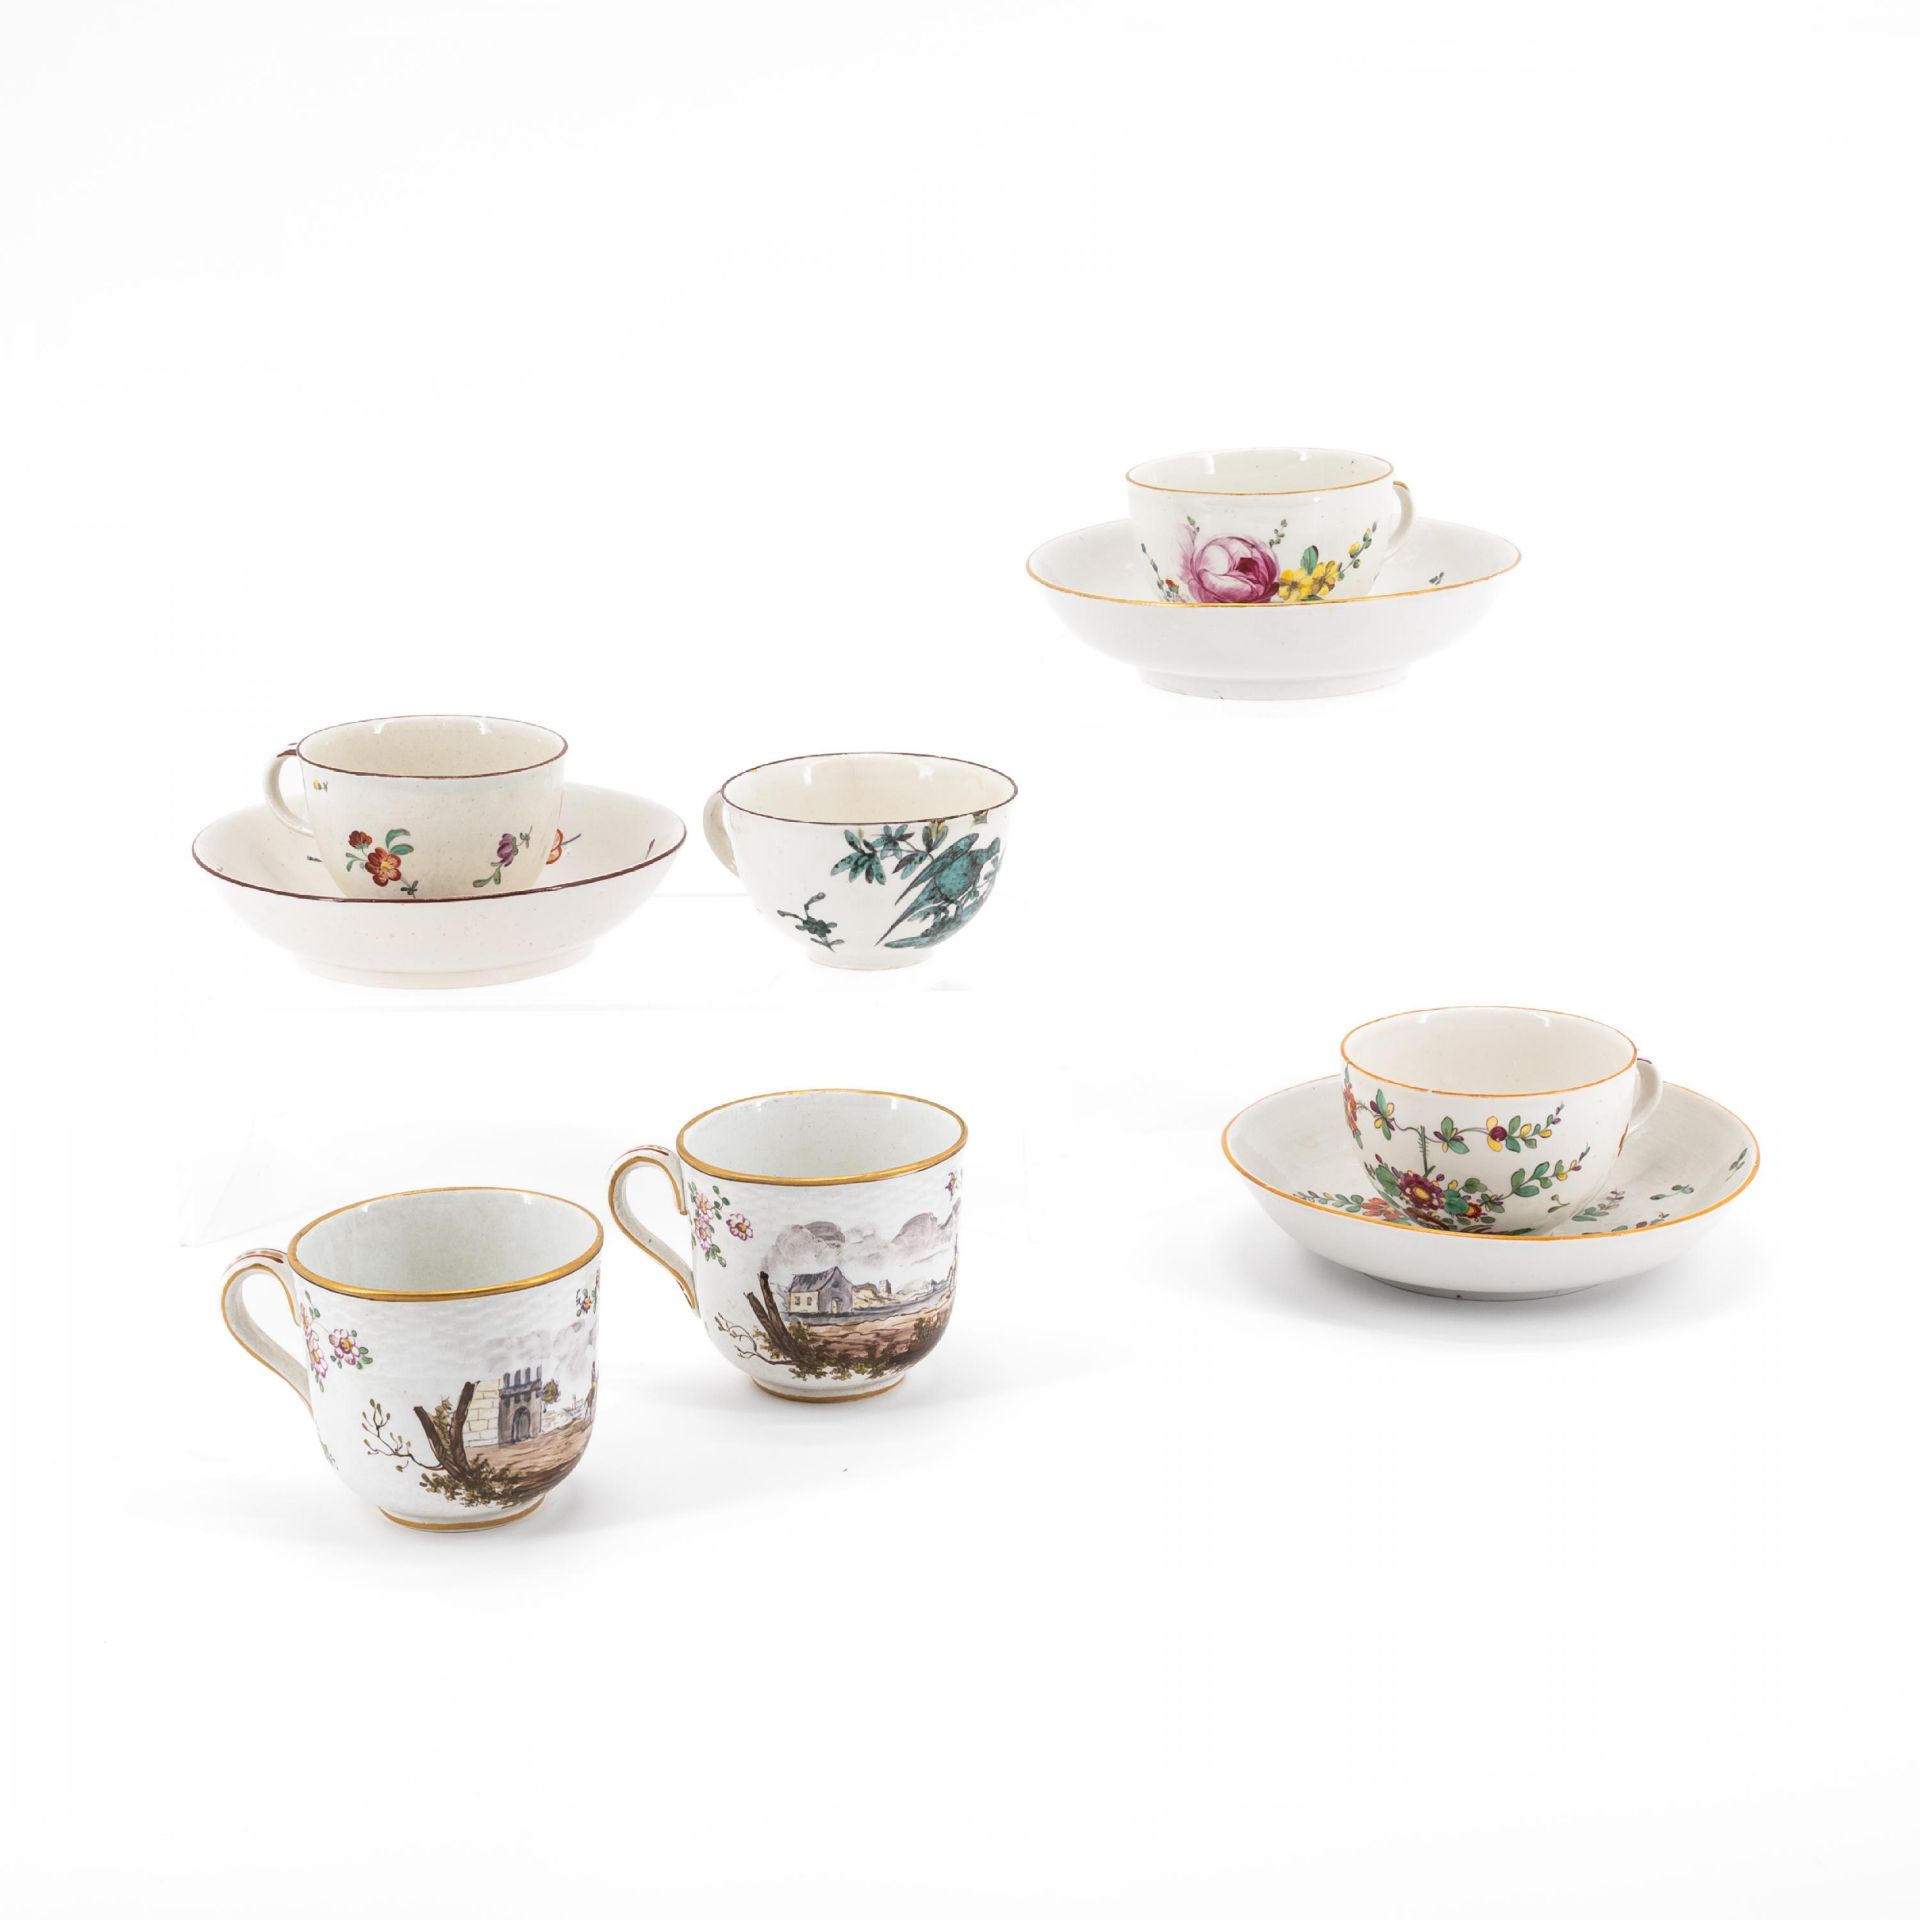 SIX PORCELAIN CUPS AND THREE SAUCERS WITH BIRD DECOR, FLOWERS AND LANDSCAPE SCENES